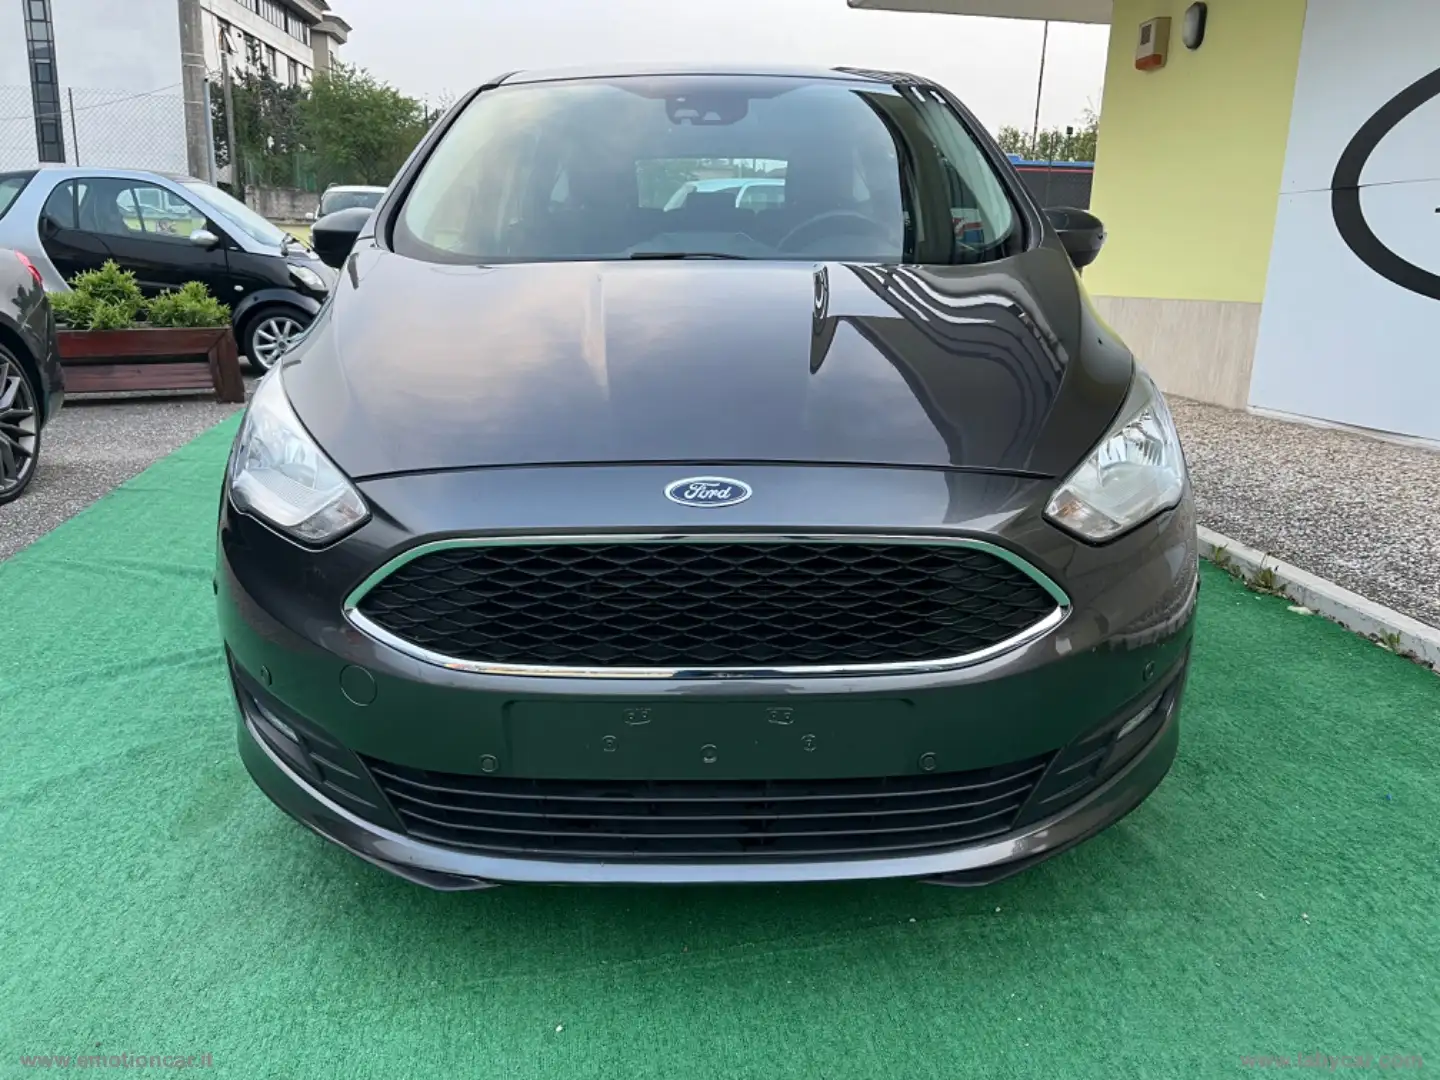 Ford C-Max 1.5 TDCi 120 CV S&S Business -2018 Grey - 2